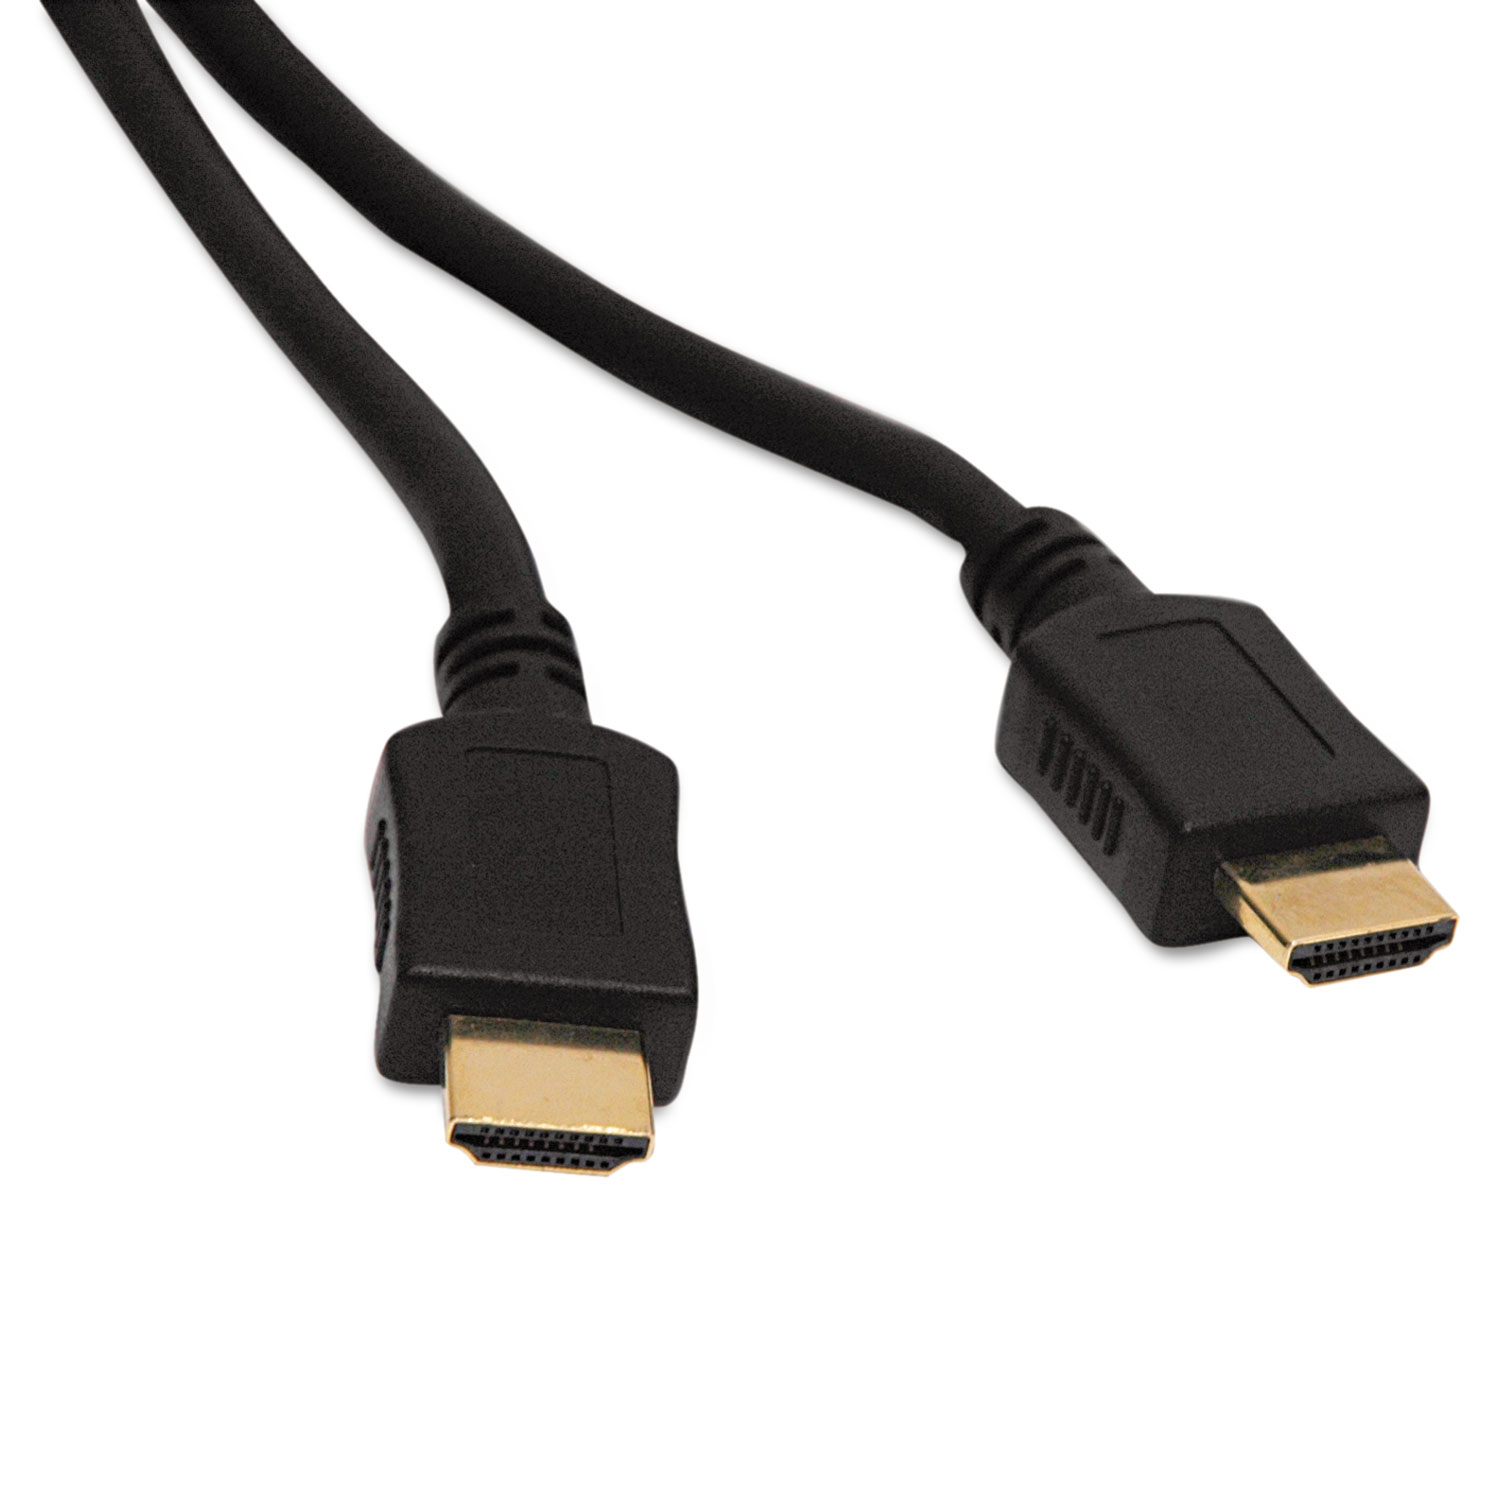  Tripp Lite P568-010 High Speed HDMI Cable, Ultra HD 4K x 2K, Digital Video with Audio (M/M), 10 ft. (TRPP568010) 